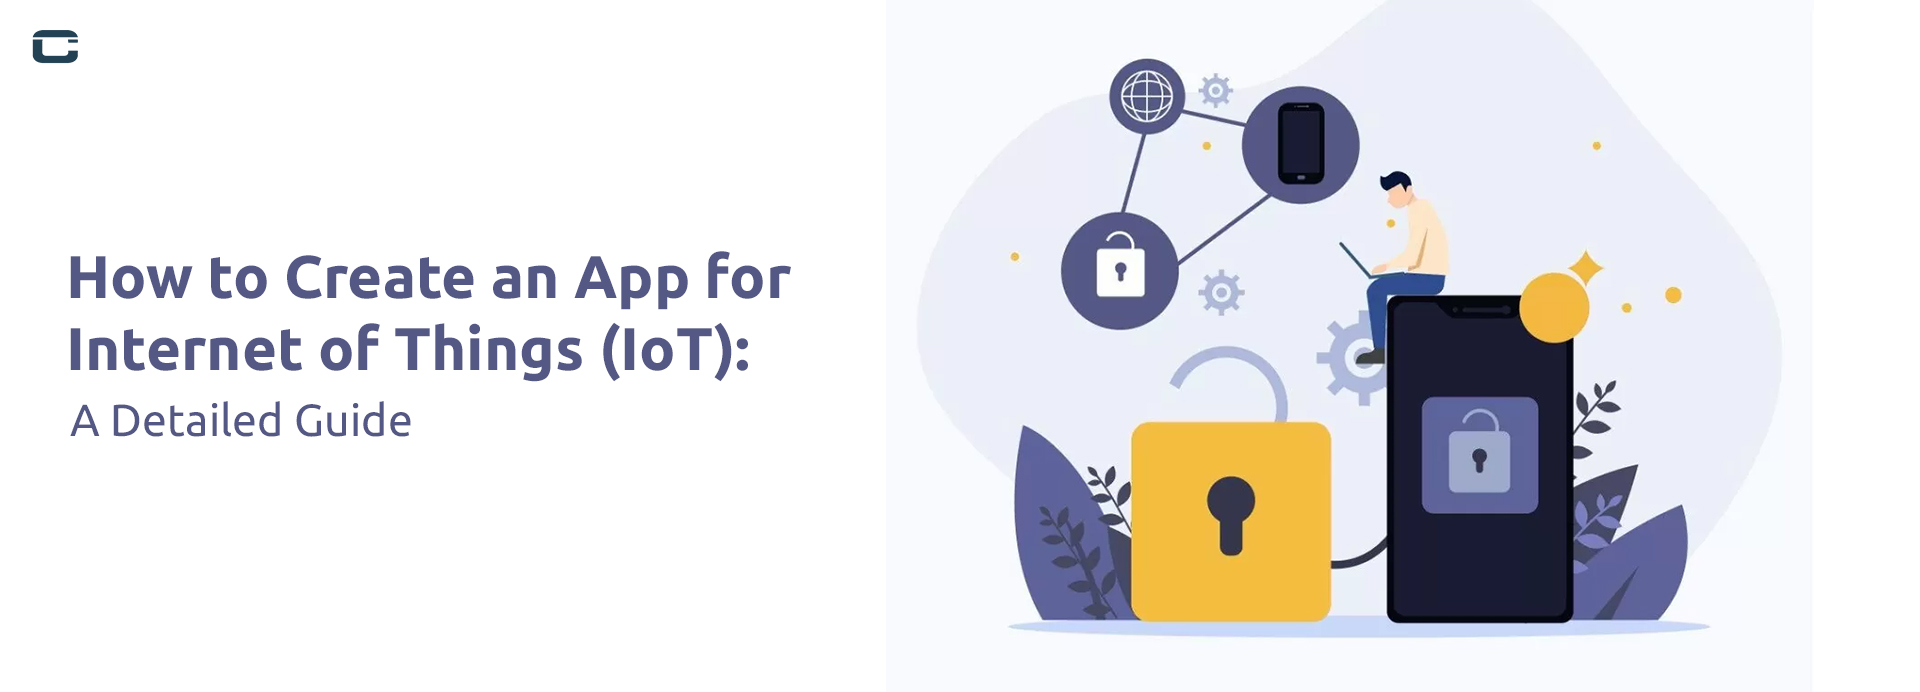 How to Create an App for the Internet of Things (IoT): A Detailed Guide